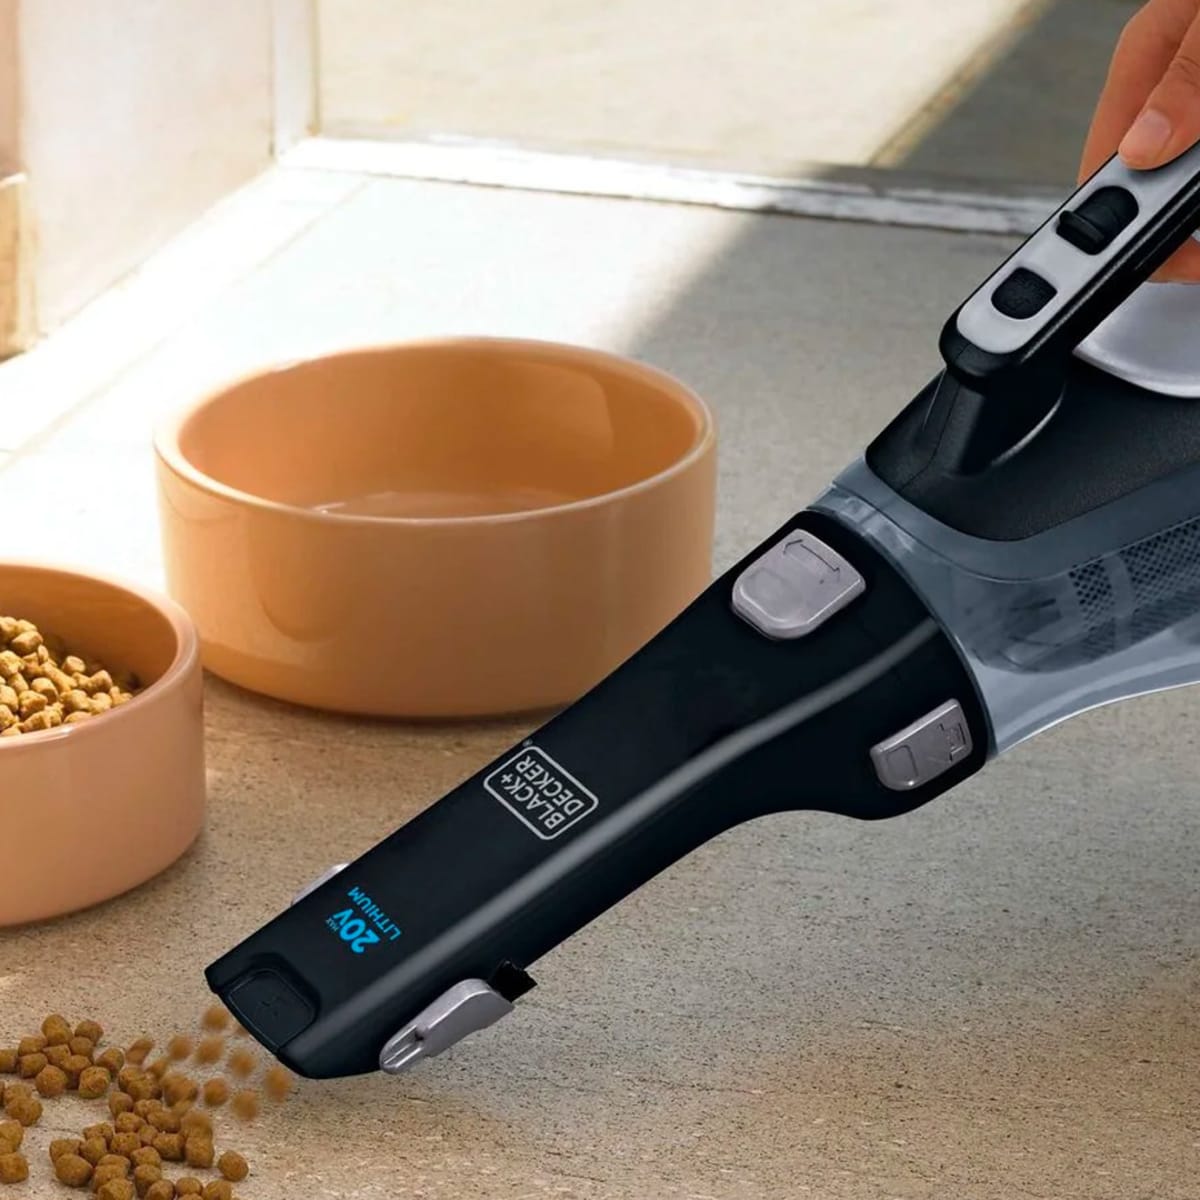 A Black and Decker dust buster is 33% off for Cyber Monday